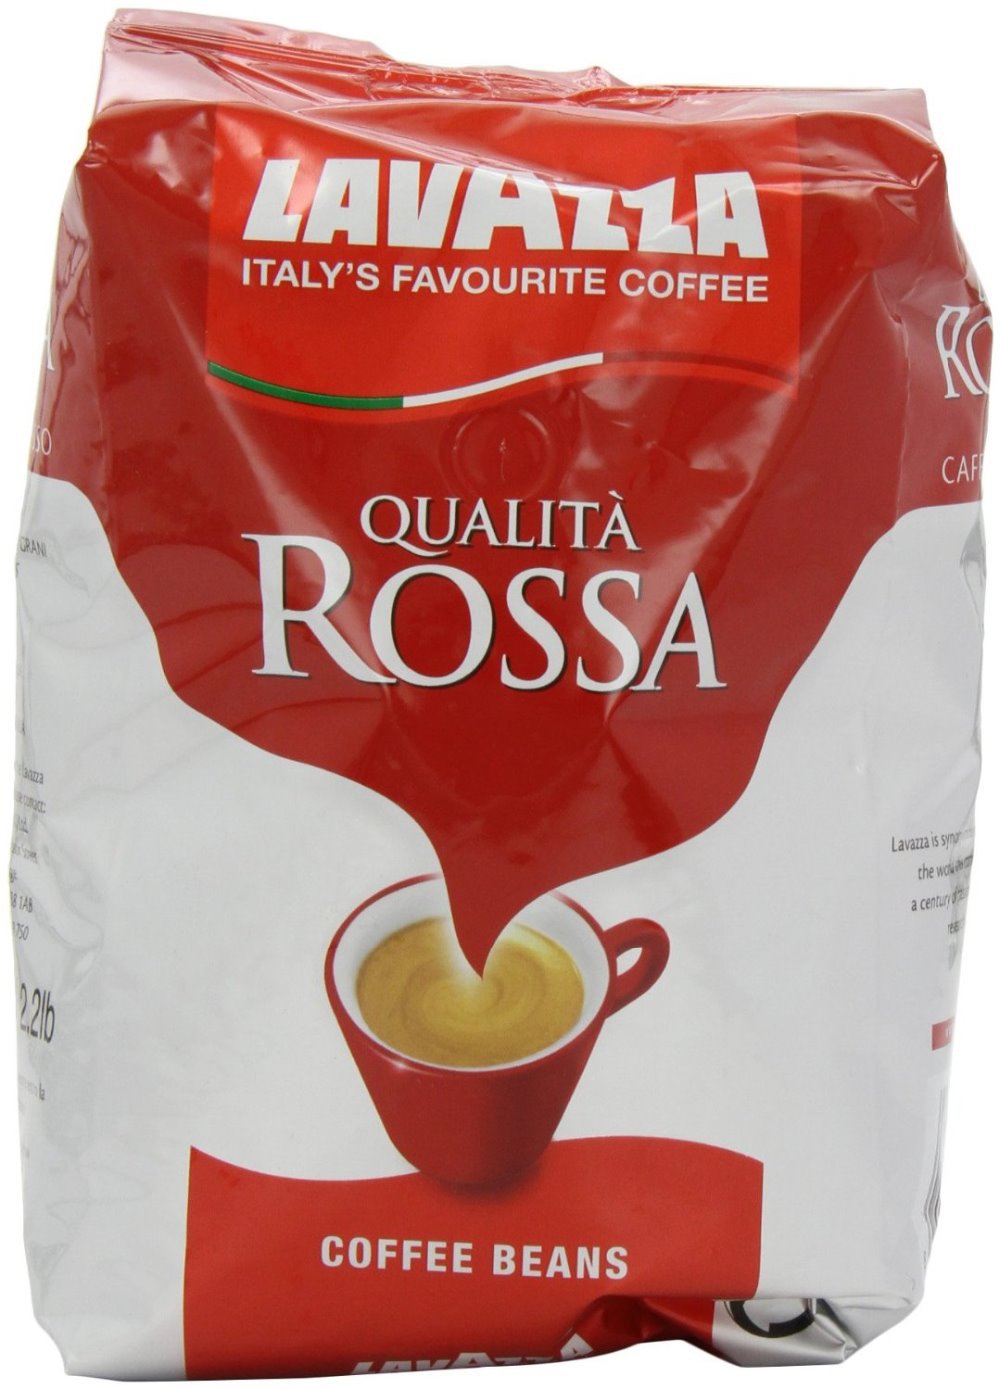 The Italian original package imports coffee beans Rossa Lavazza Rosa blended with 1000 g of pure